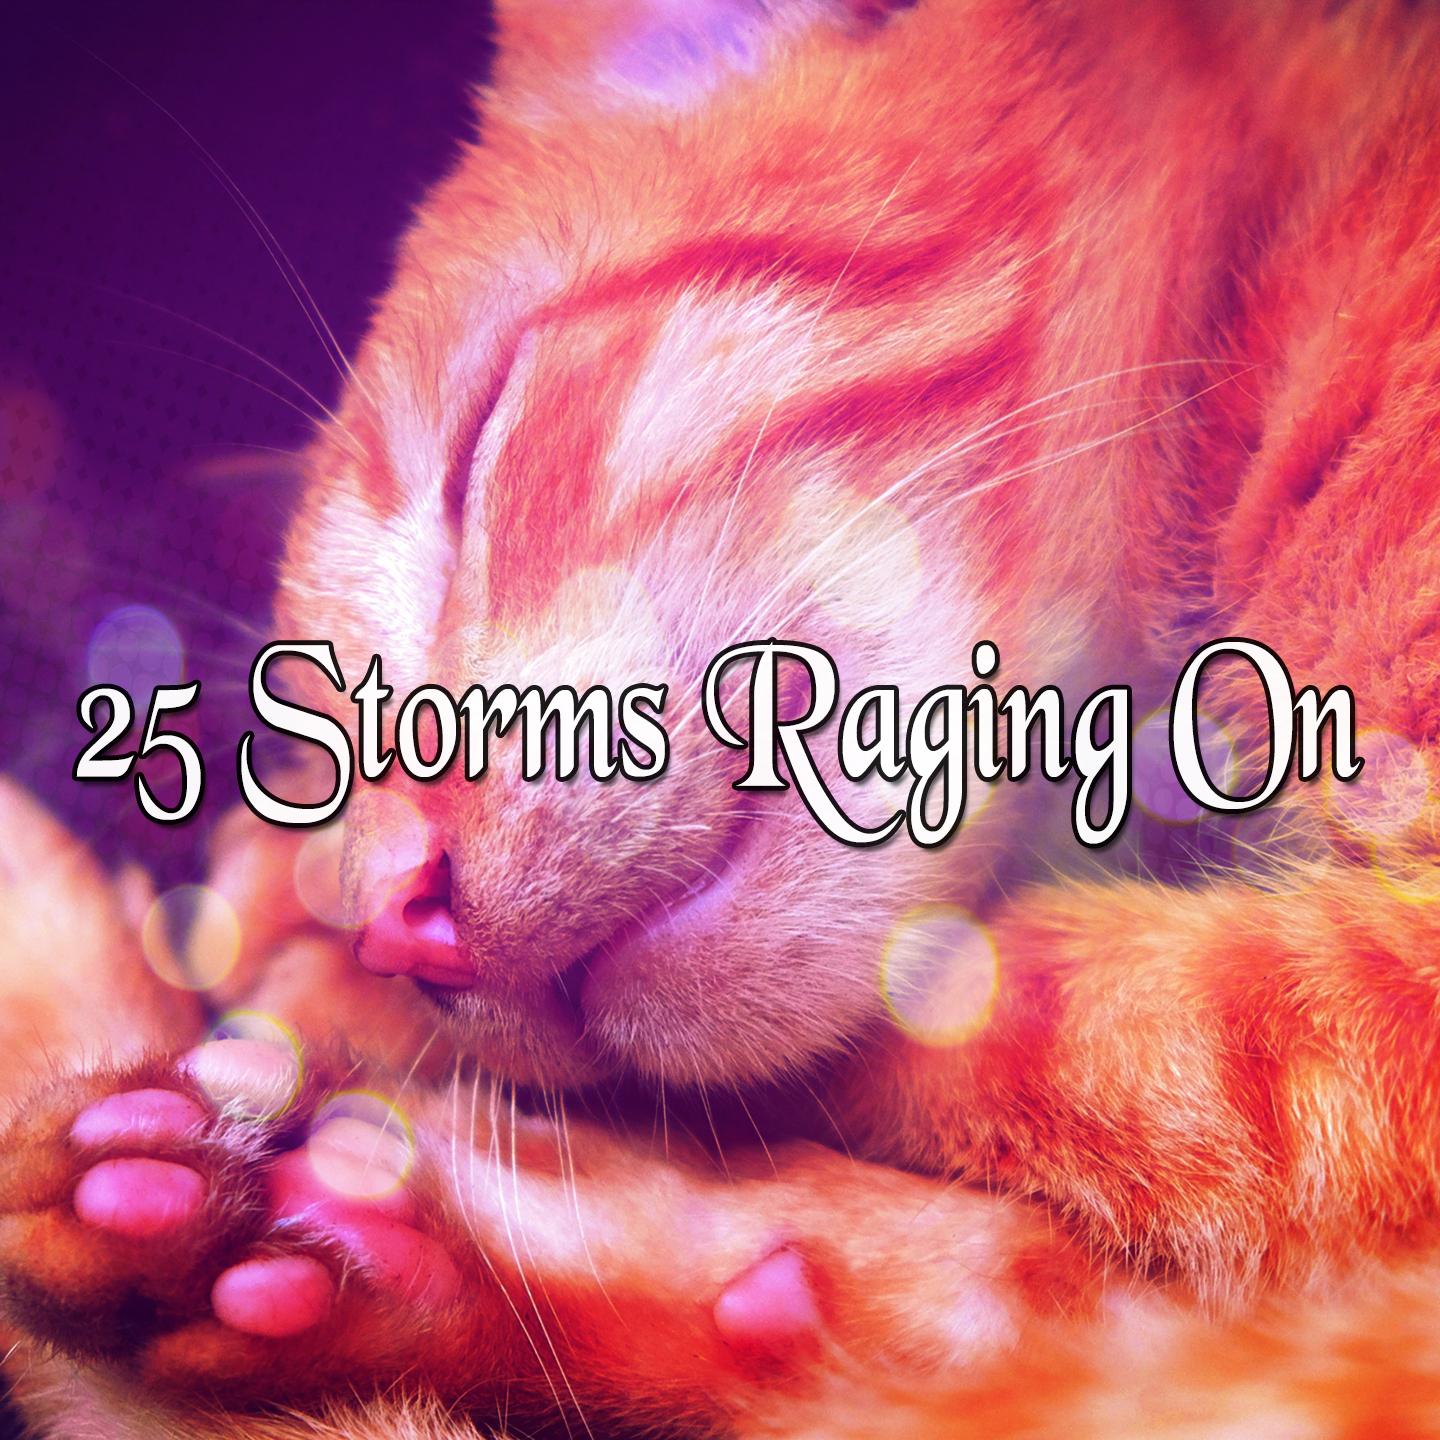 25 Storms Raging On